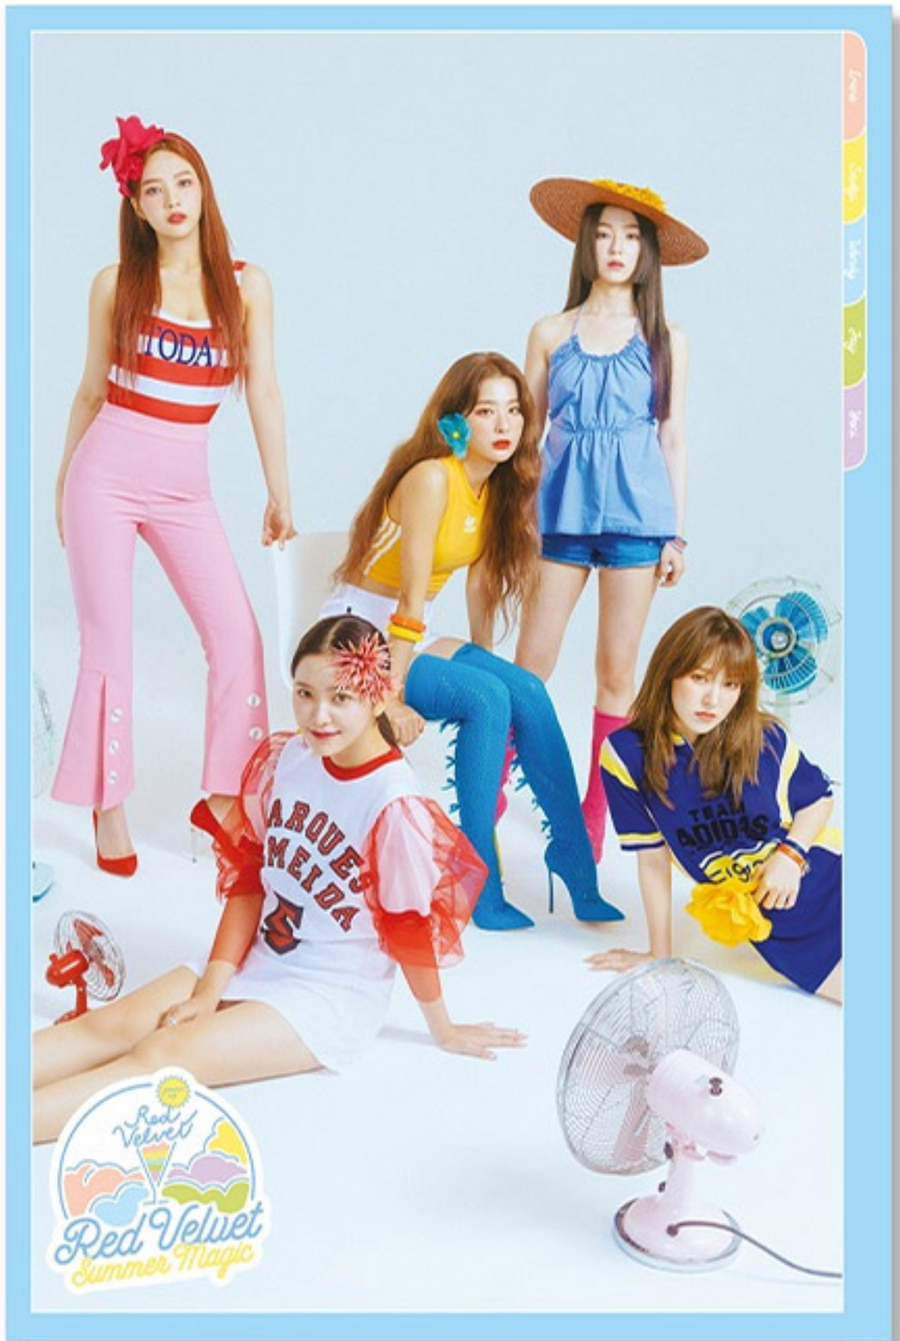 Red Velvet Summer Magic Official Poster - Limited Edition Version